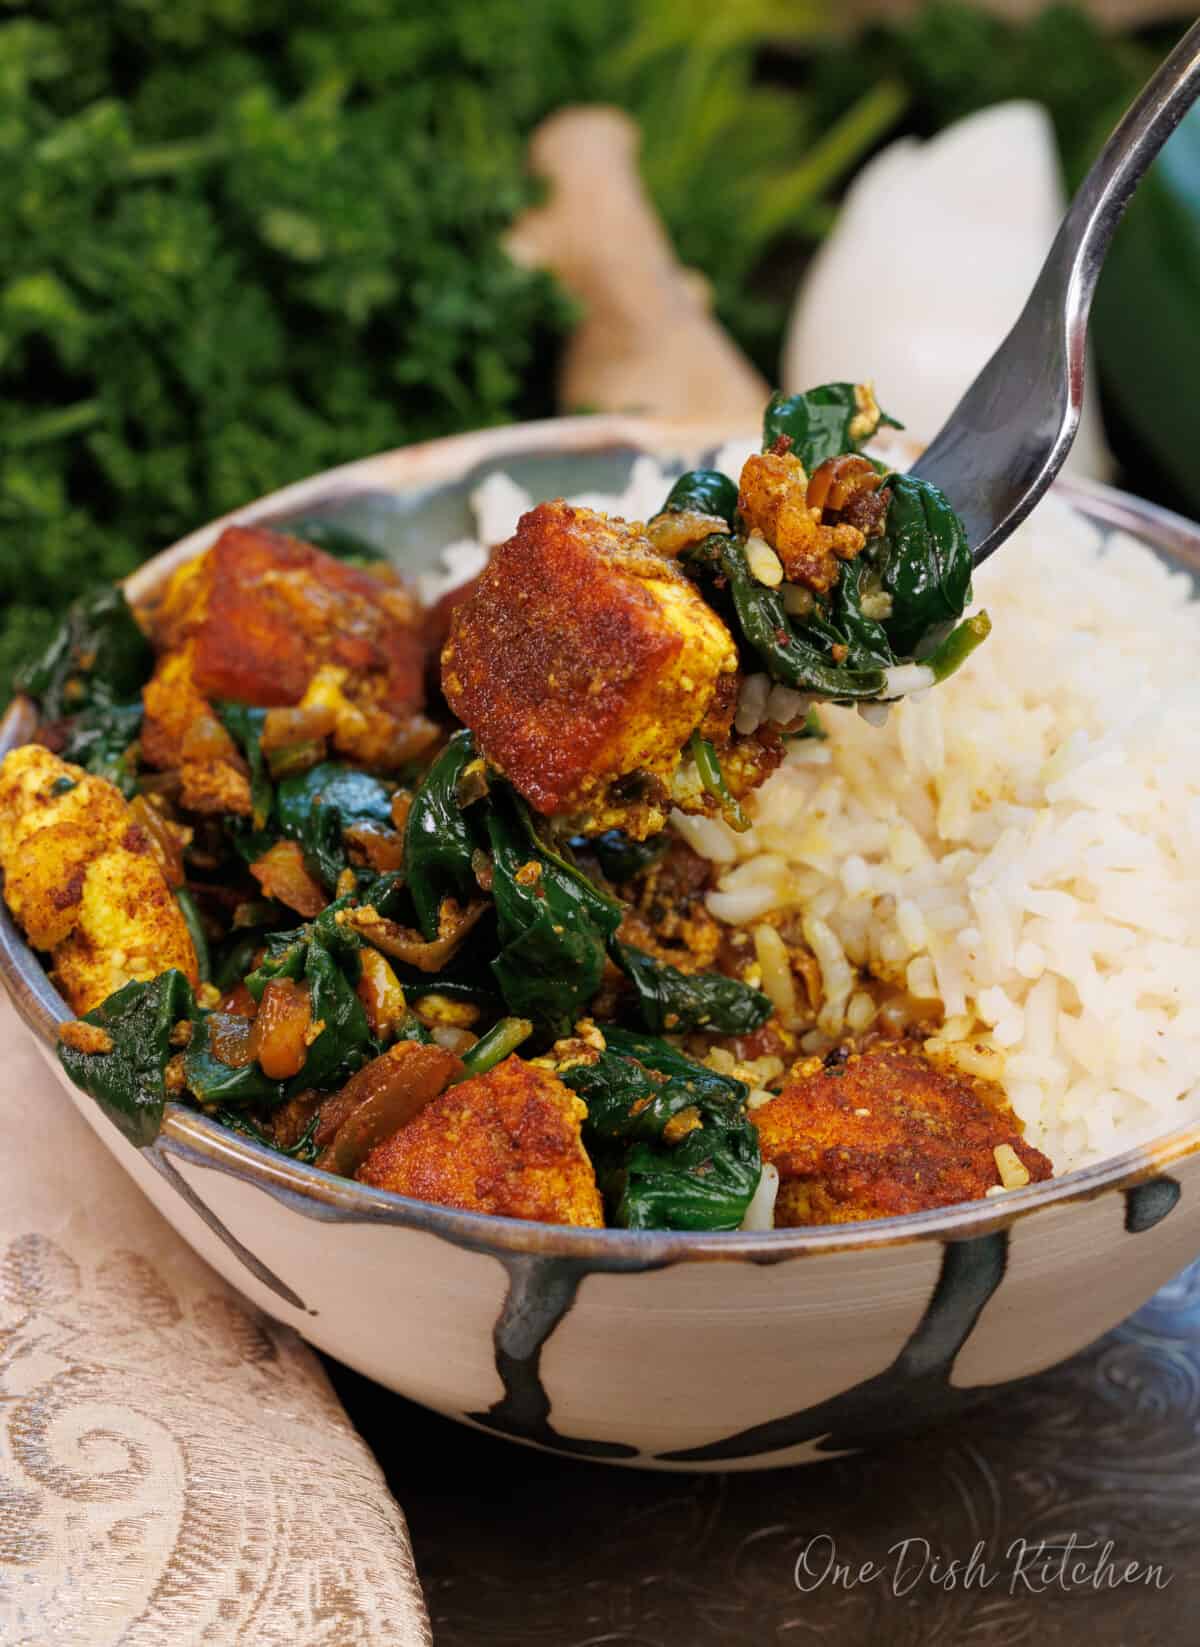 a fork filled with paneer and spinach over the bowl of saag paneer